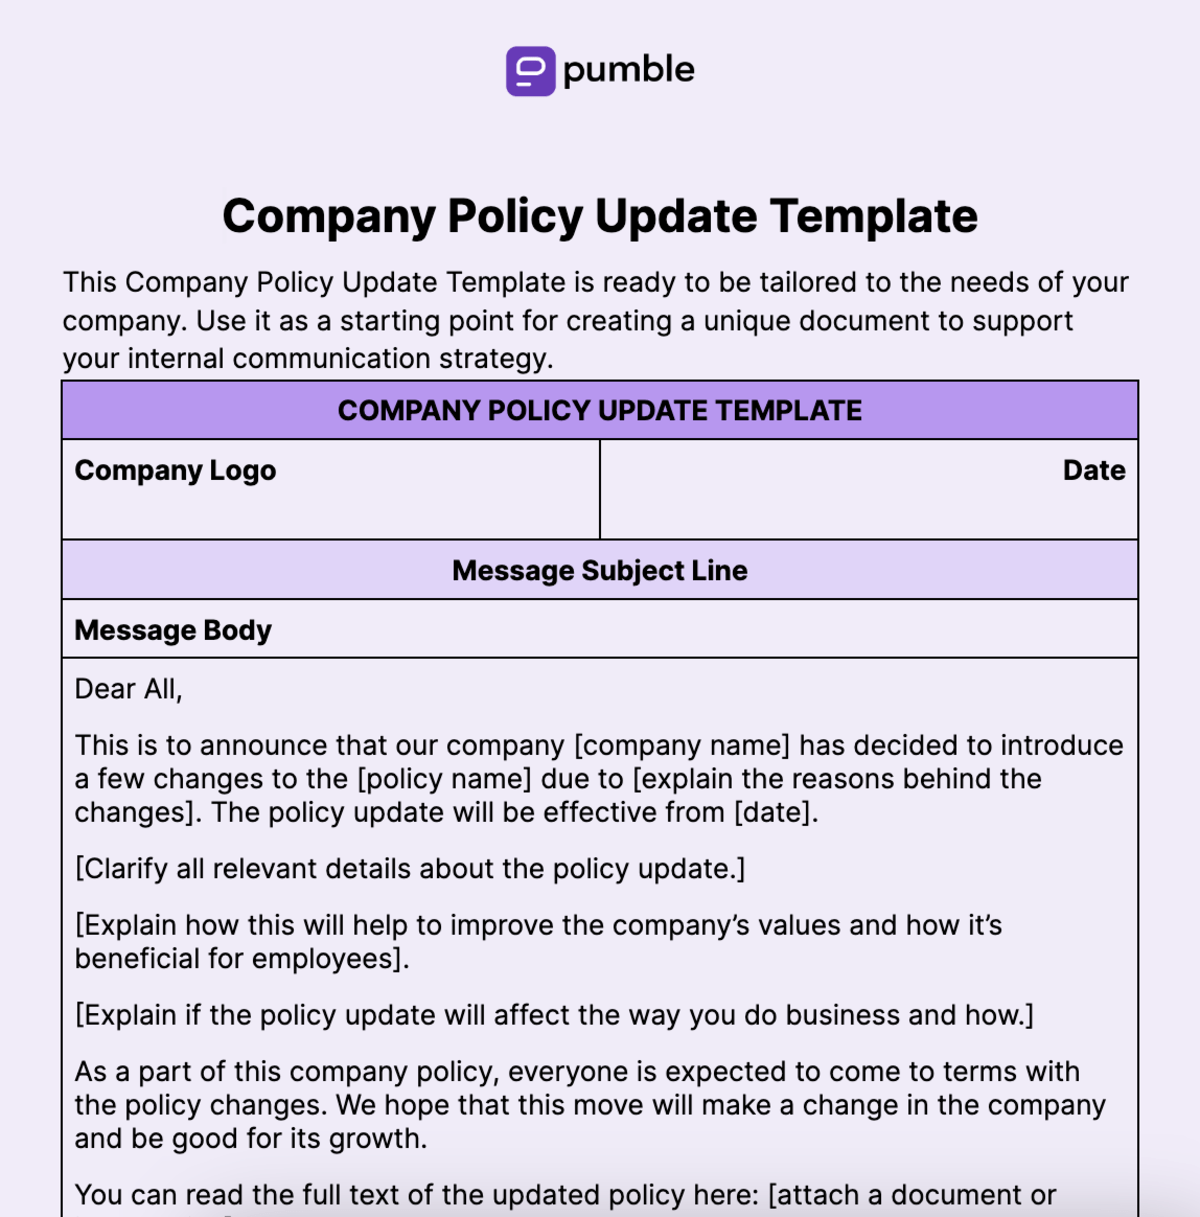 Company Policy Update Template